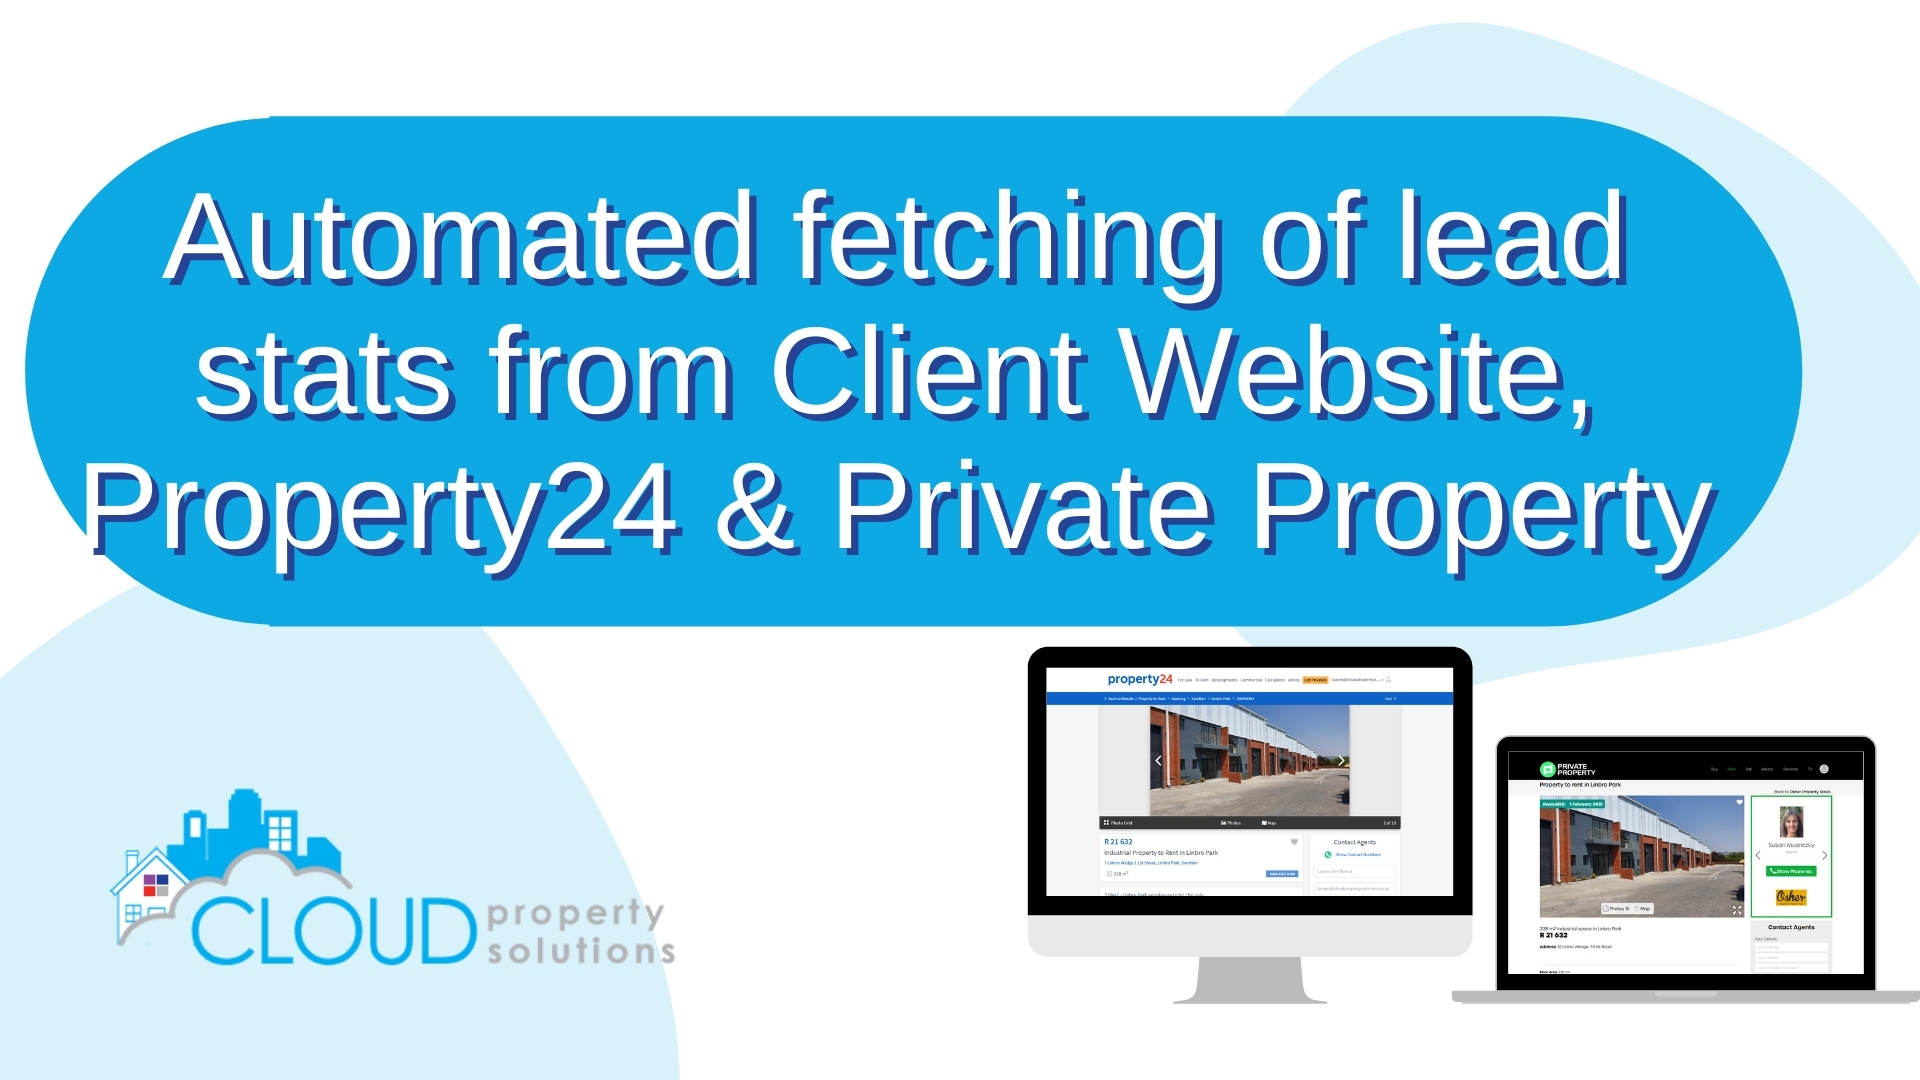 Automated fetching of lead stats from Client Website, Prop 24 & Private Property.